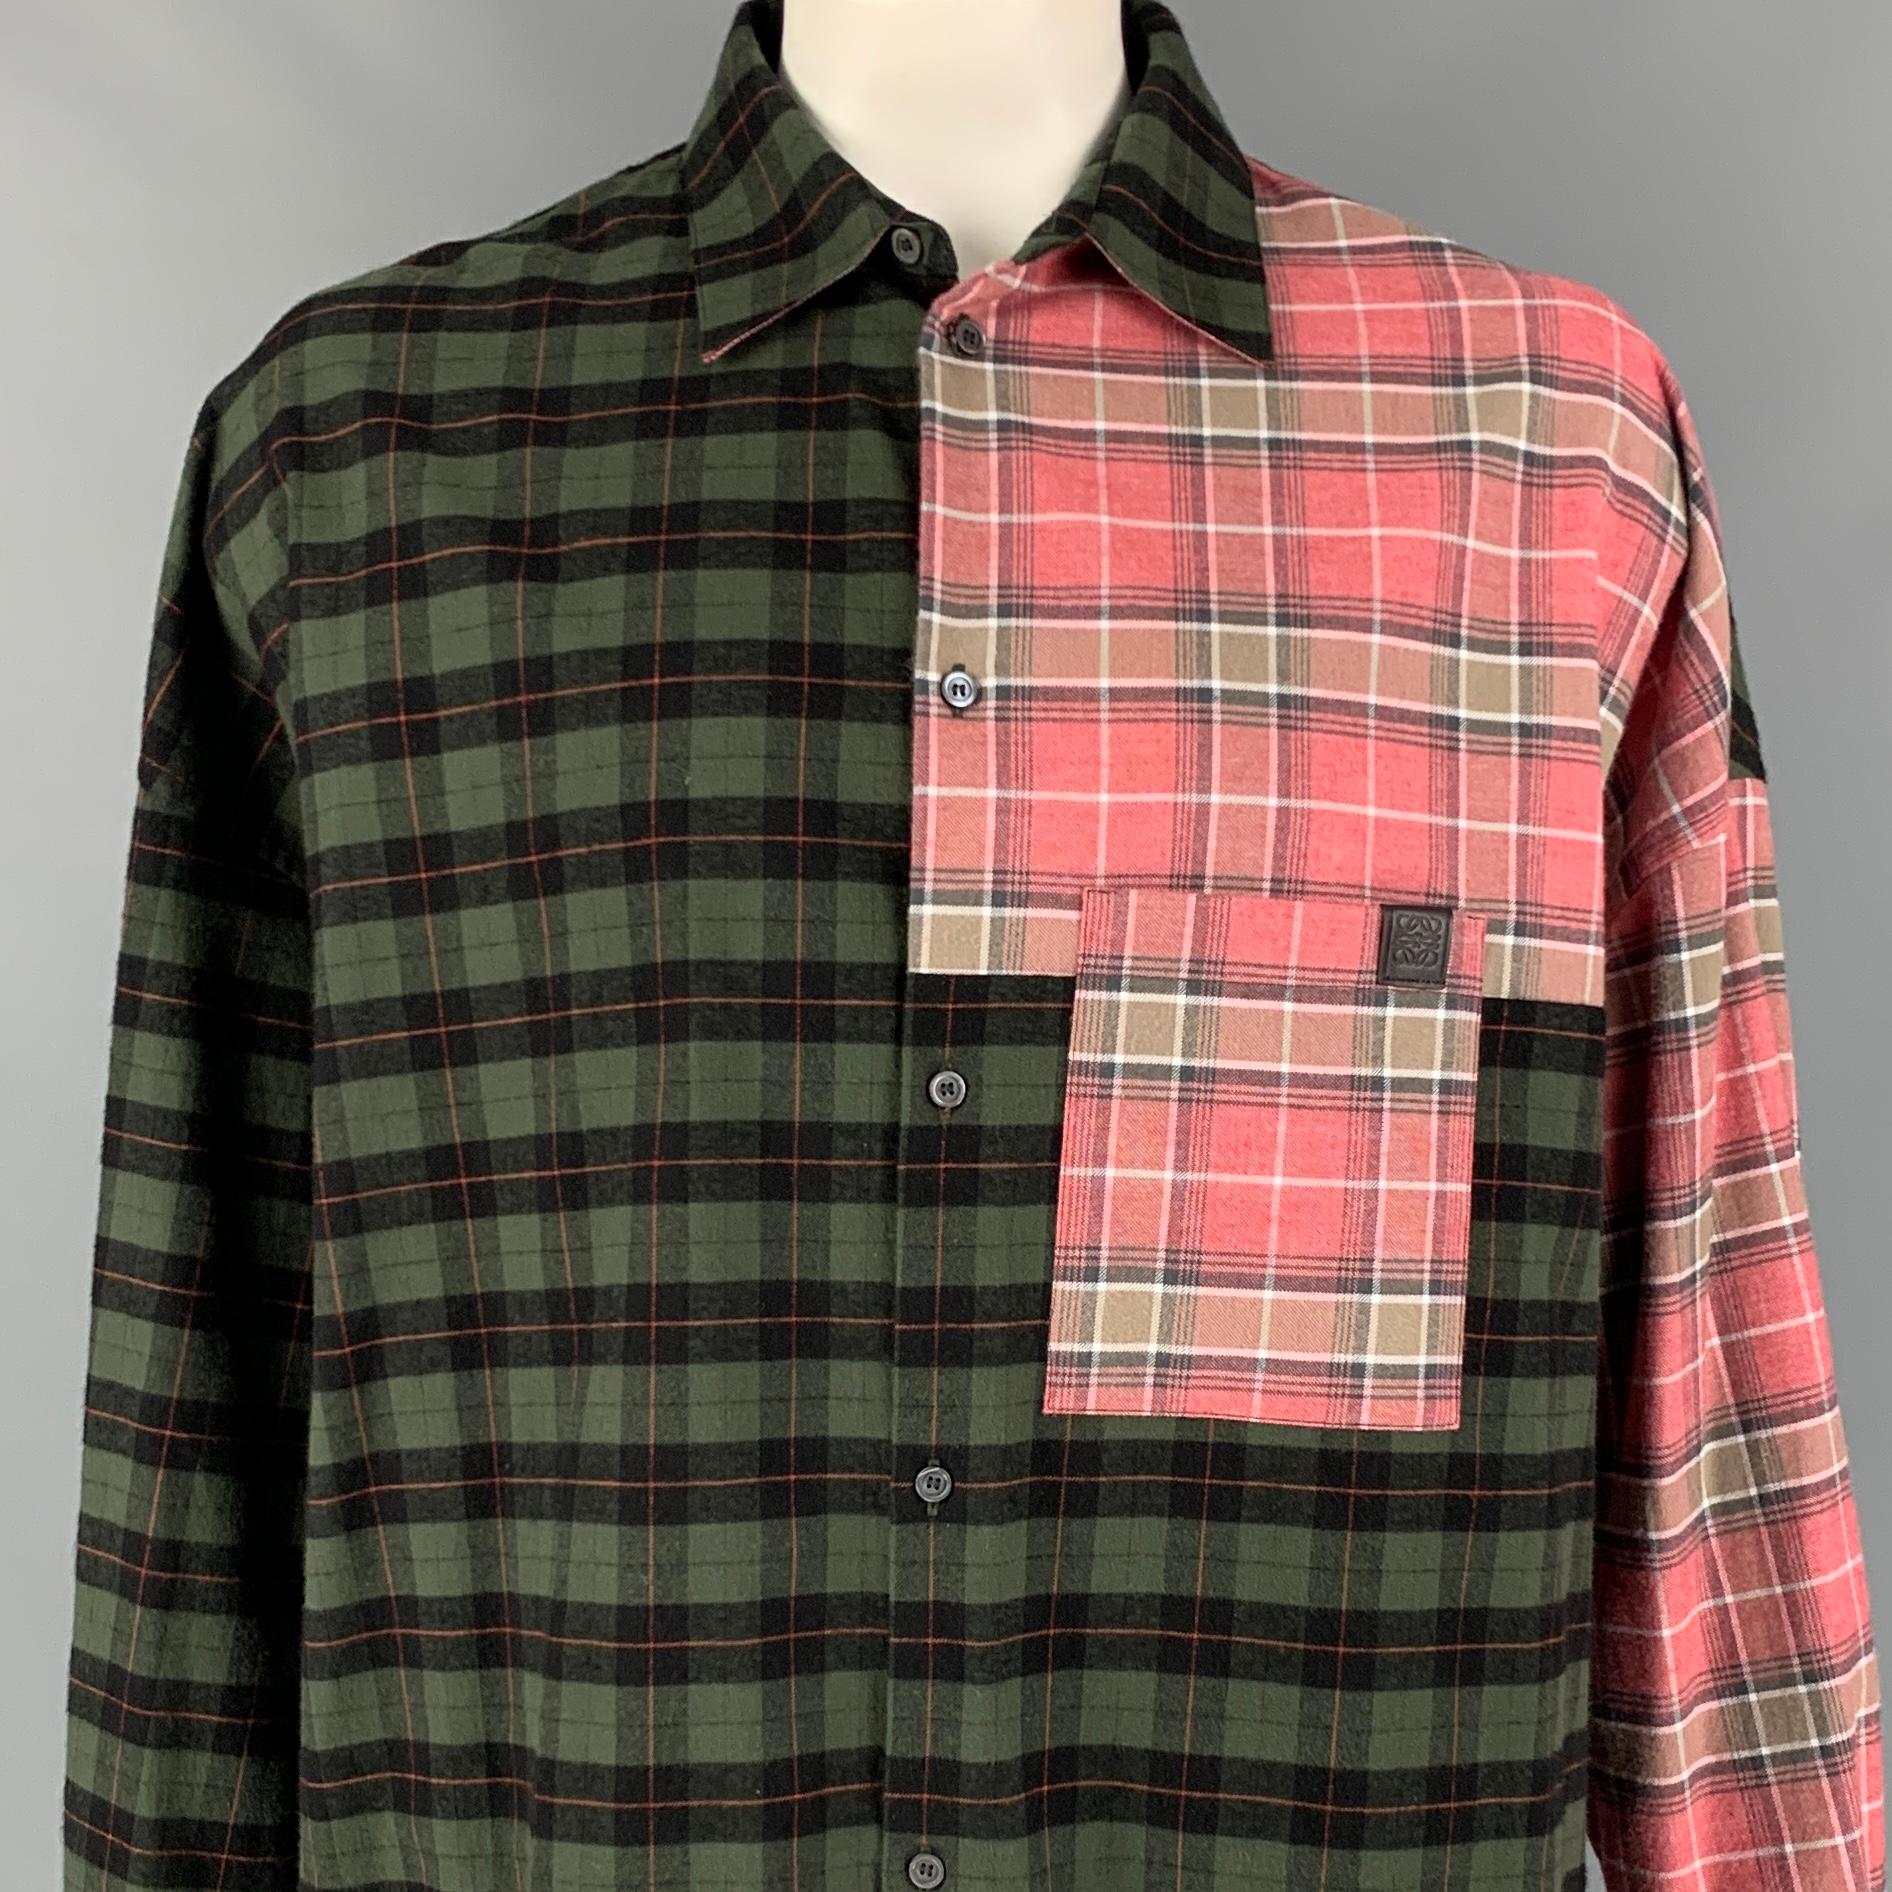 LOEWE x J.W.Anderson long sleeve shirt comes in a green & pink plaid cotton featuring a oversized fit, front pocket, and a buttoned closure. Made in Romania. 

New With Tags. 
Marked: 43
Original Retail Price: $675.00

Measurements:

Shoulder: 31